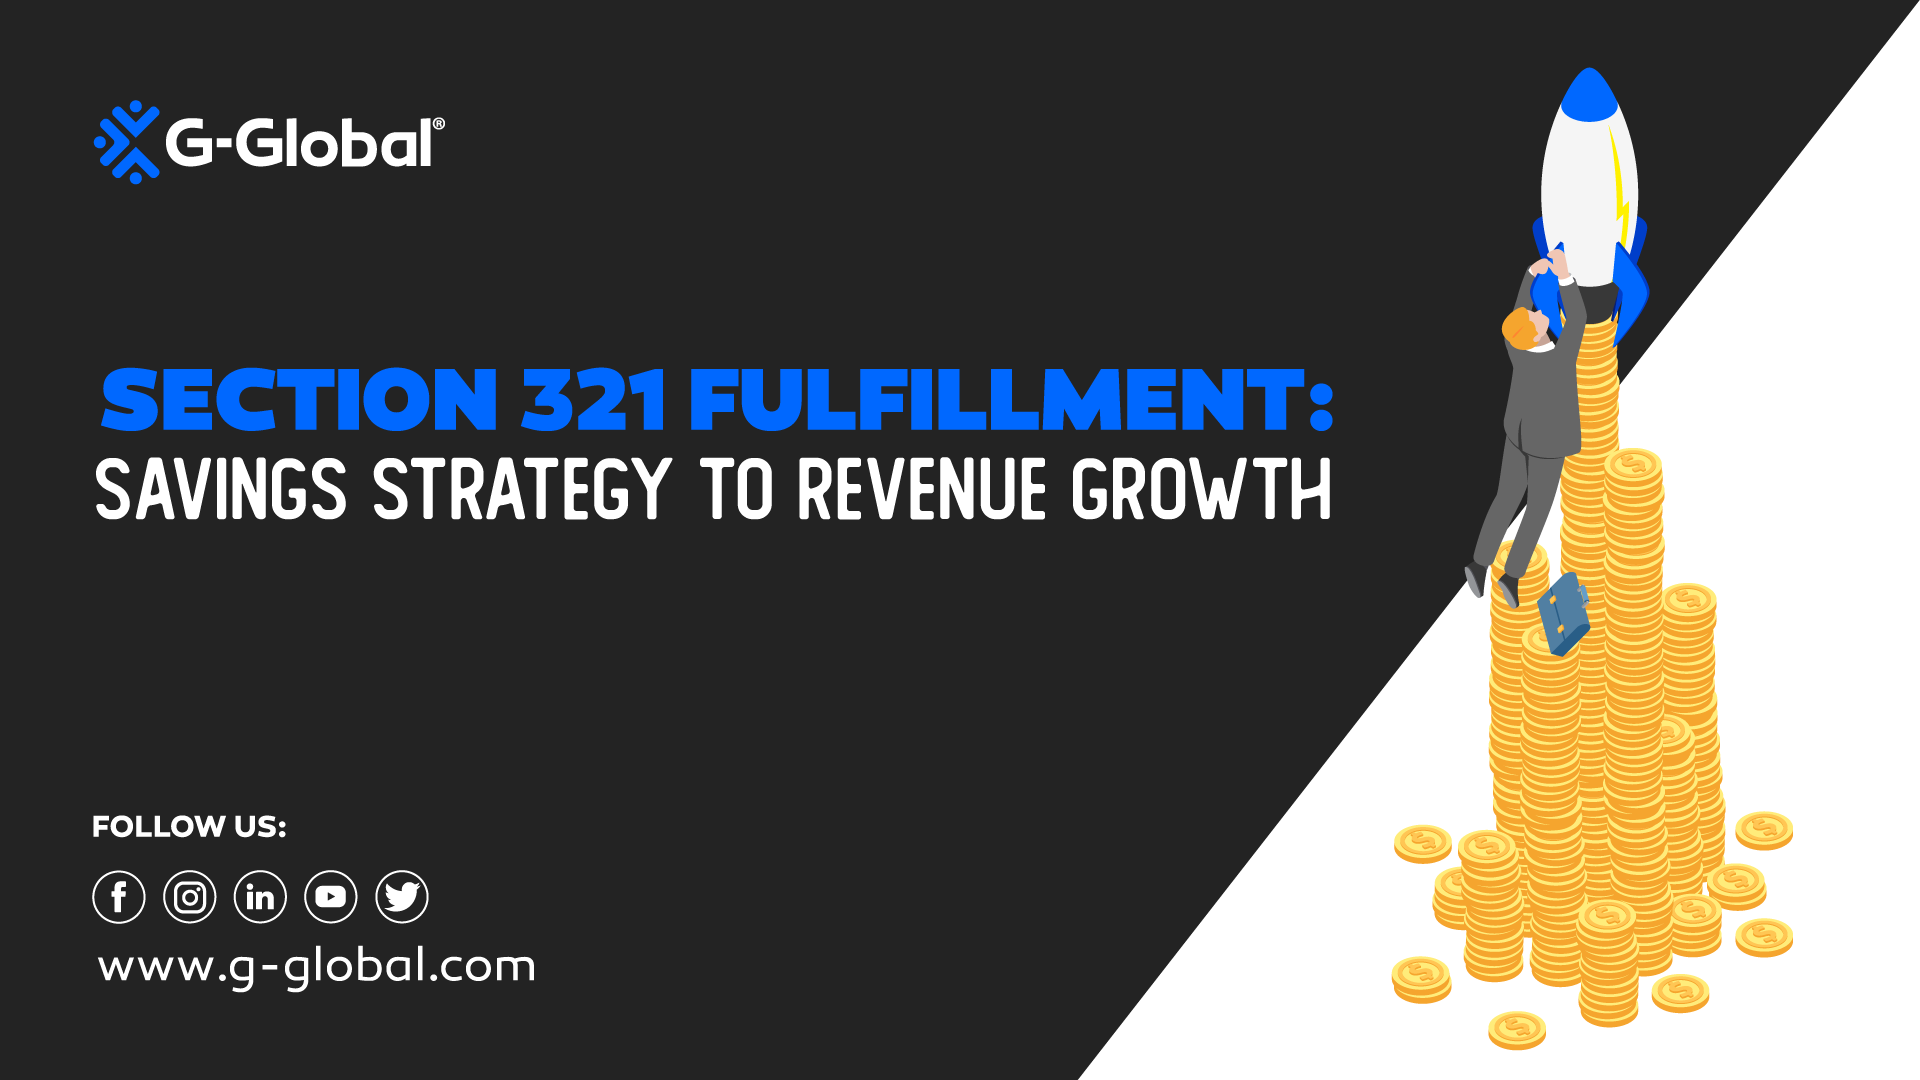 Section 321 Fulfillment: Savings Strategy to Revenue Growth